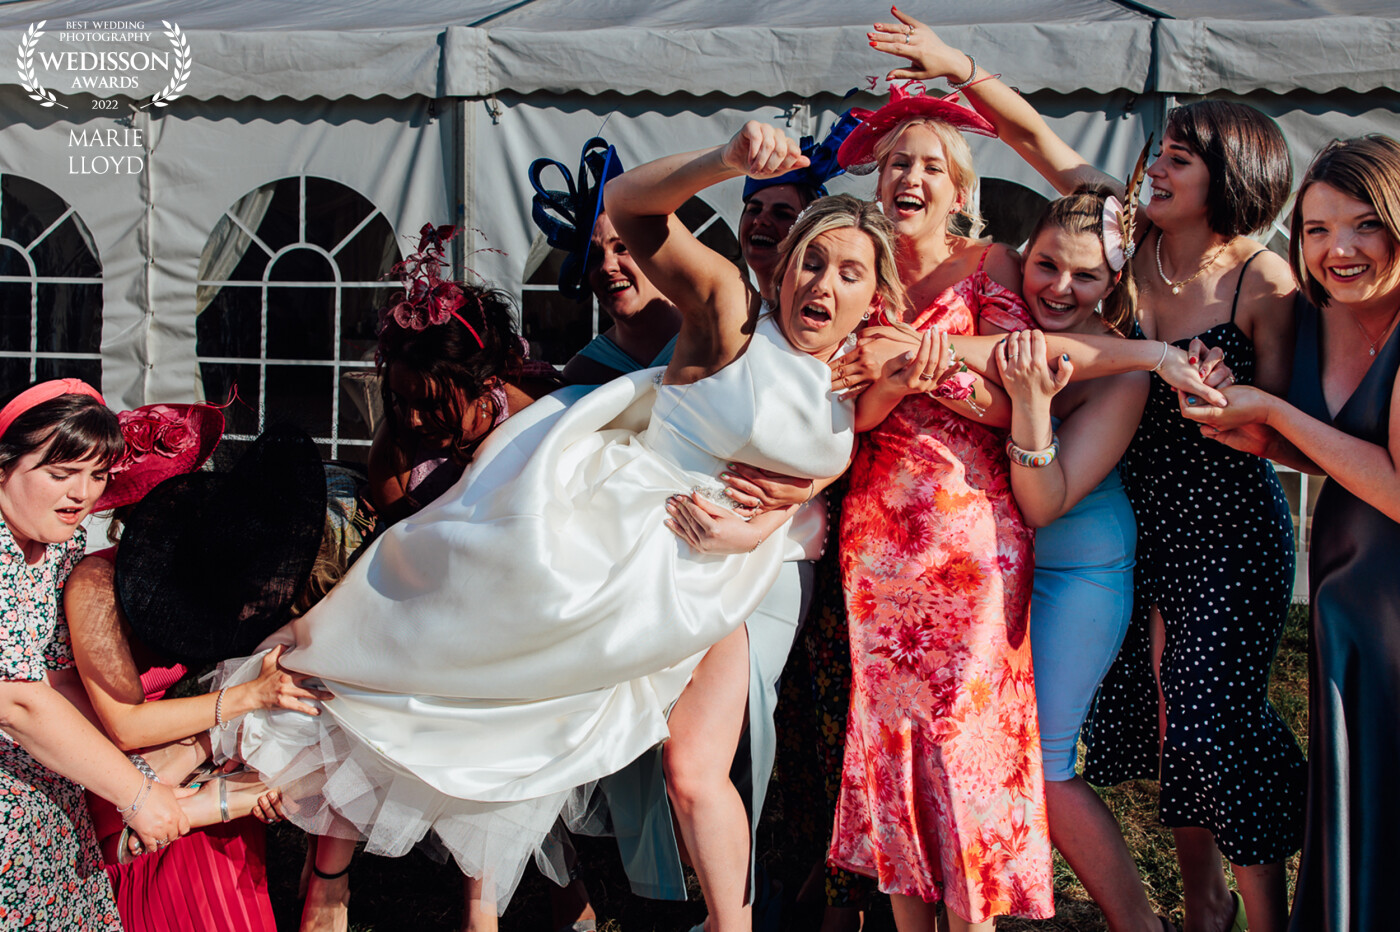 Bride being put down after her photograph of being picked up by some slightly intoxicated friends and bridesmaids! She began to panic that they may frop her!